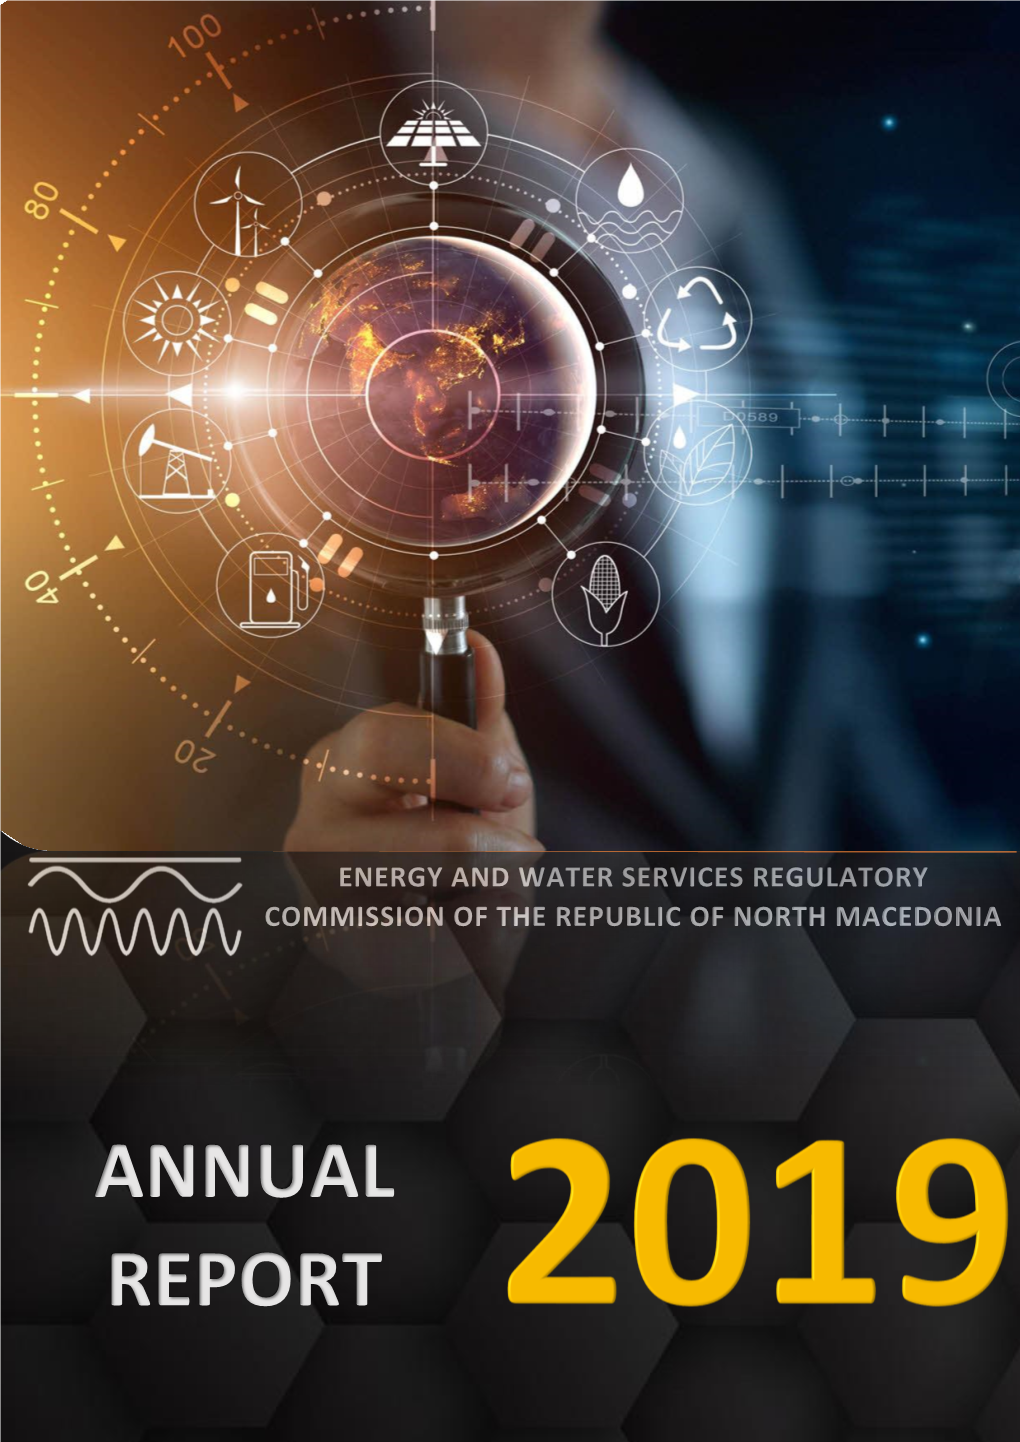 Annual Report of the Energy and Water Services Regulatory Commission of the Republic of North Macedonia for 2019, Is Further Disclosed to Your Attention